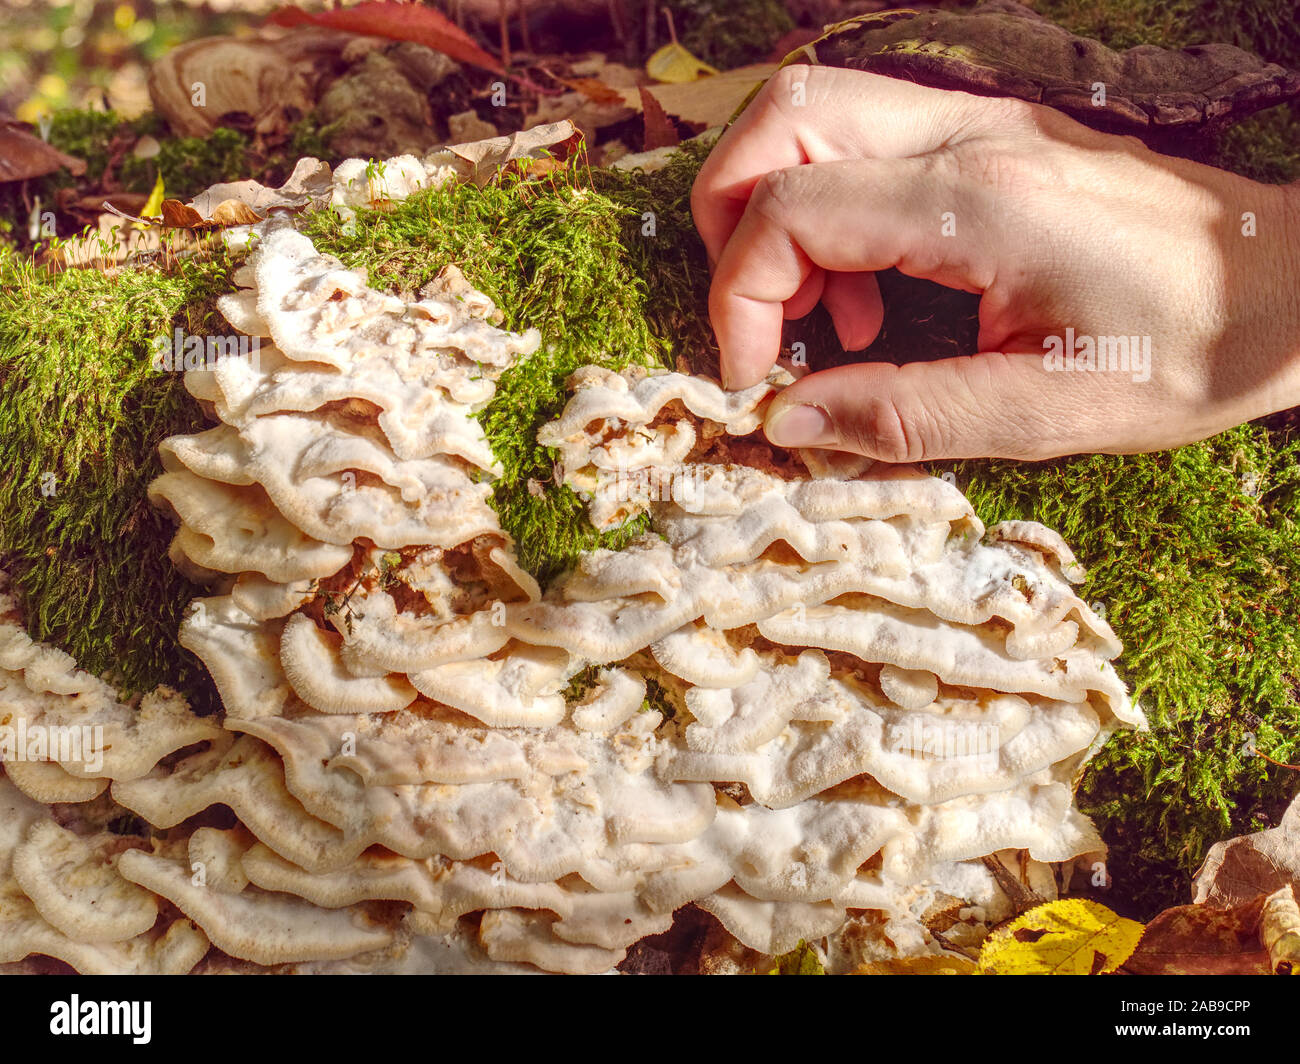 Female hand takes white mushrooms  from tree. Stump with lots of delicious edible mushrooms in the forest against  trees roots and fallen leaves. Stock Photo